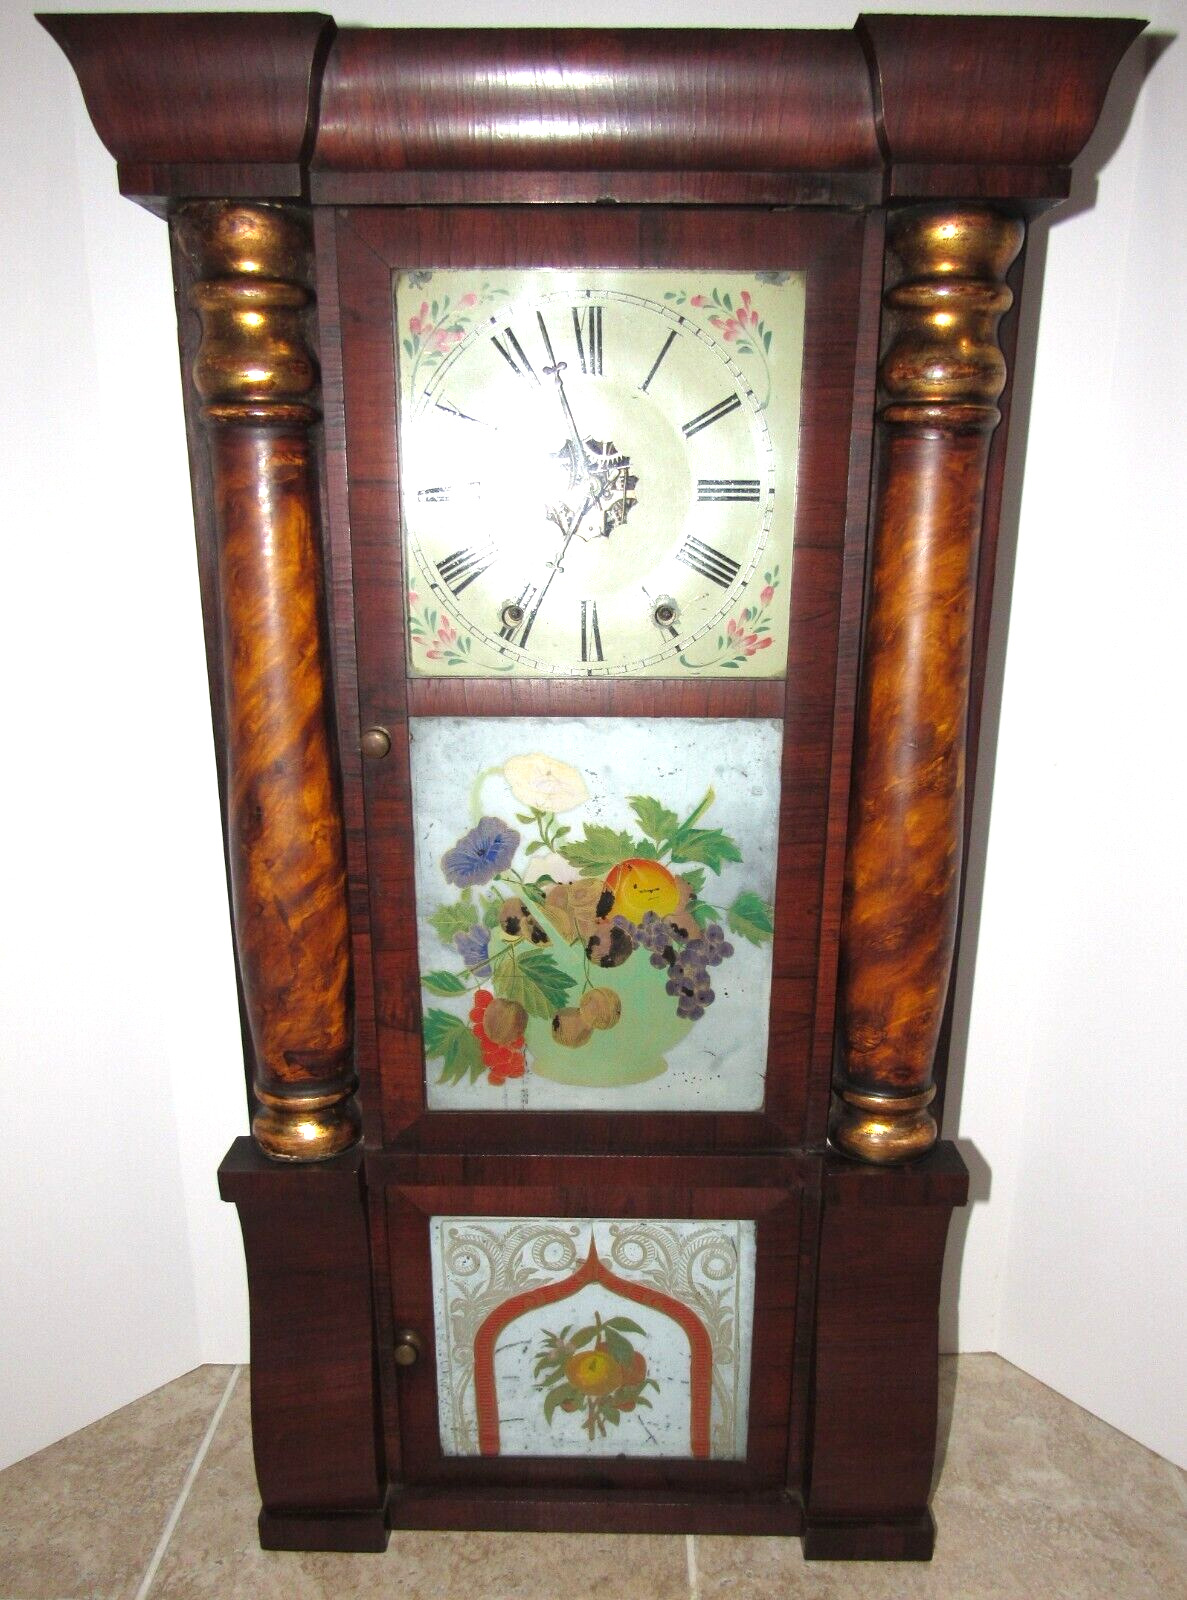 Antique Jerome & Co Triple Decker Weights Driven Clock 8-Day, Time/Strike